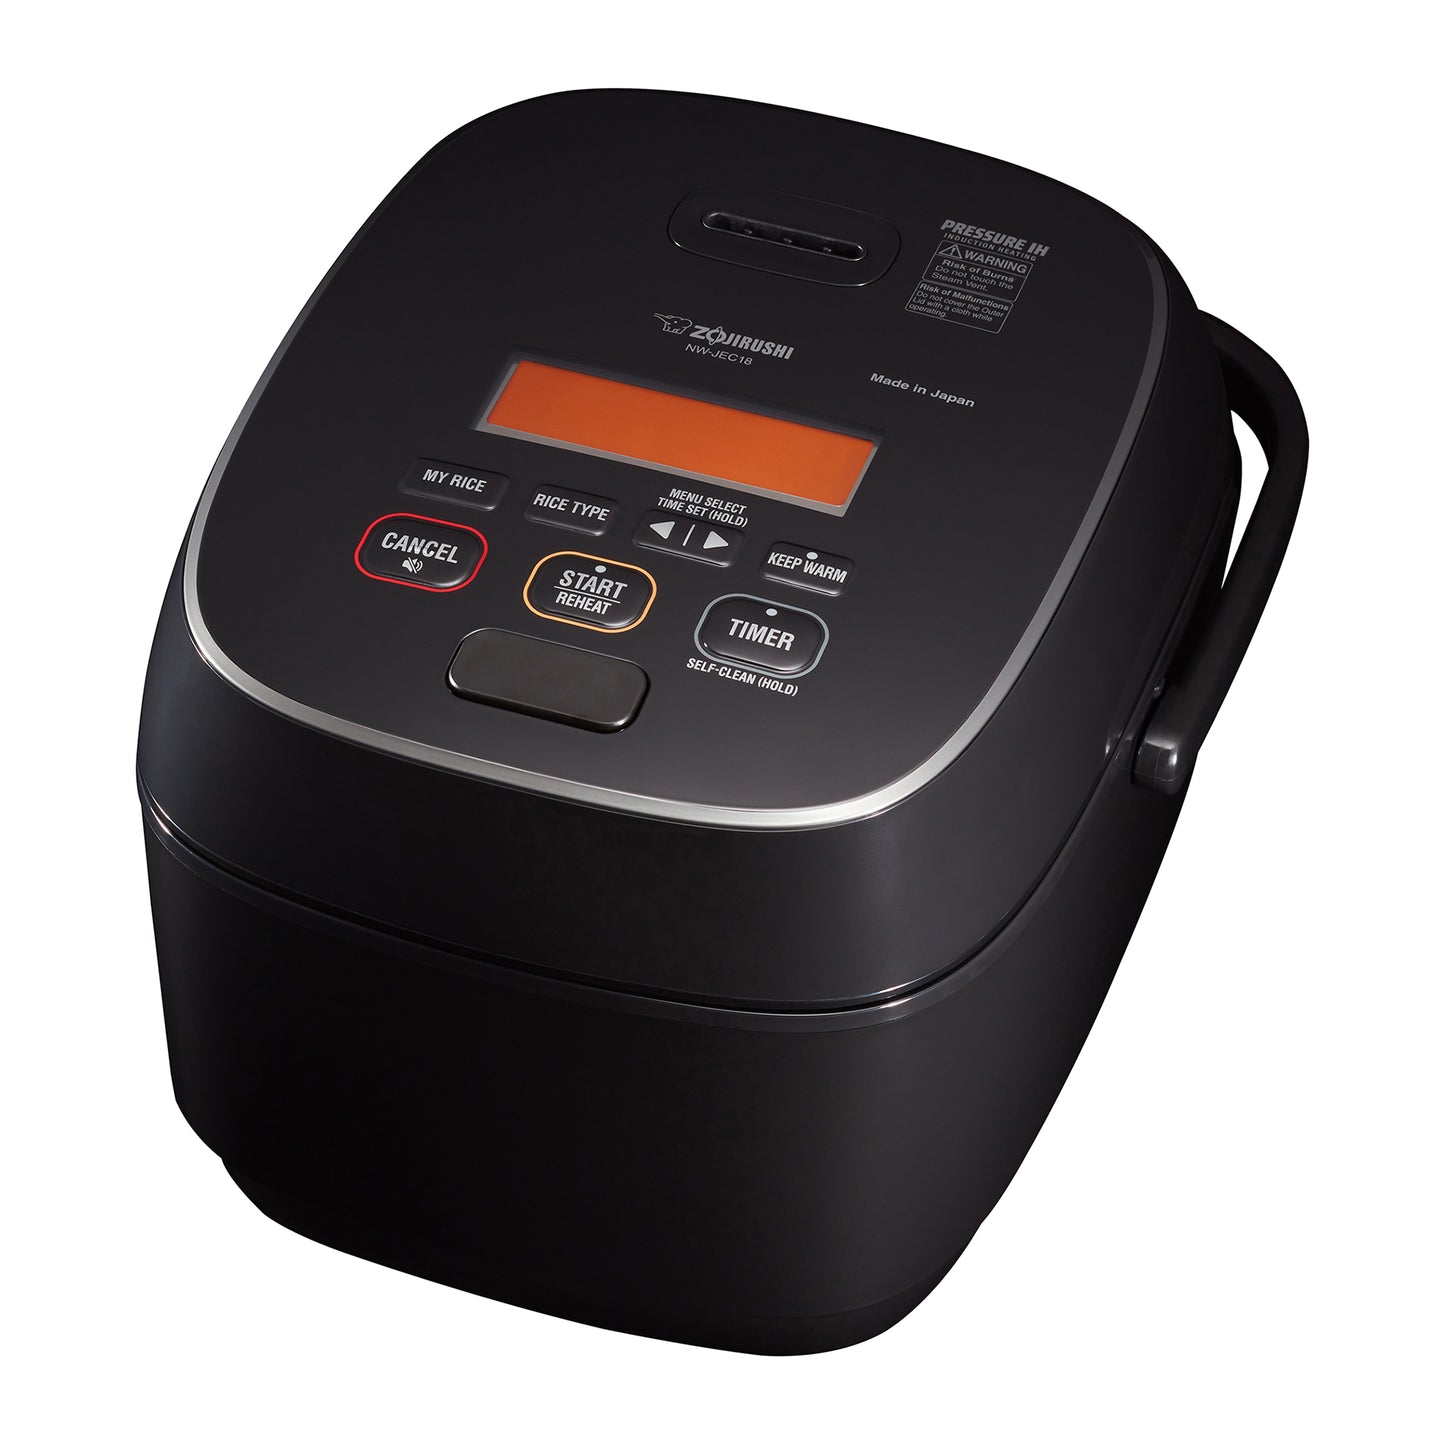 Zojirushi Np-nwc10xb Pressure Induction Heating Rice Cooker & Warmer, 5.5 Cup, S